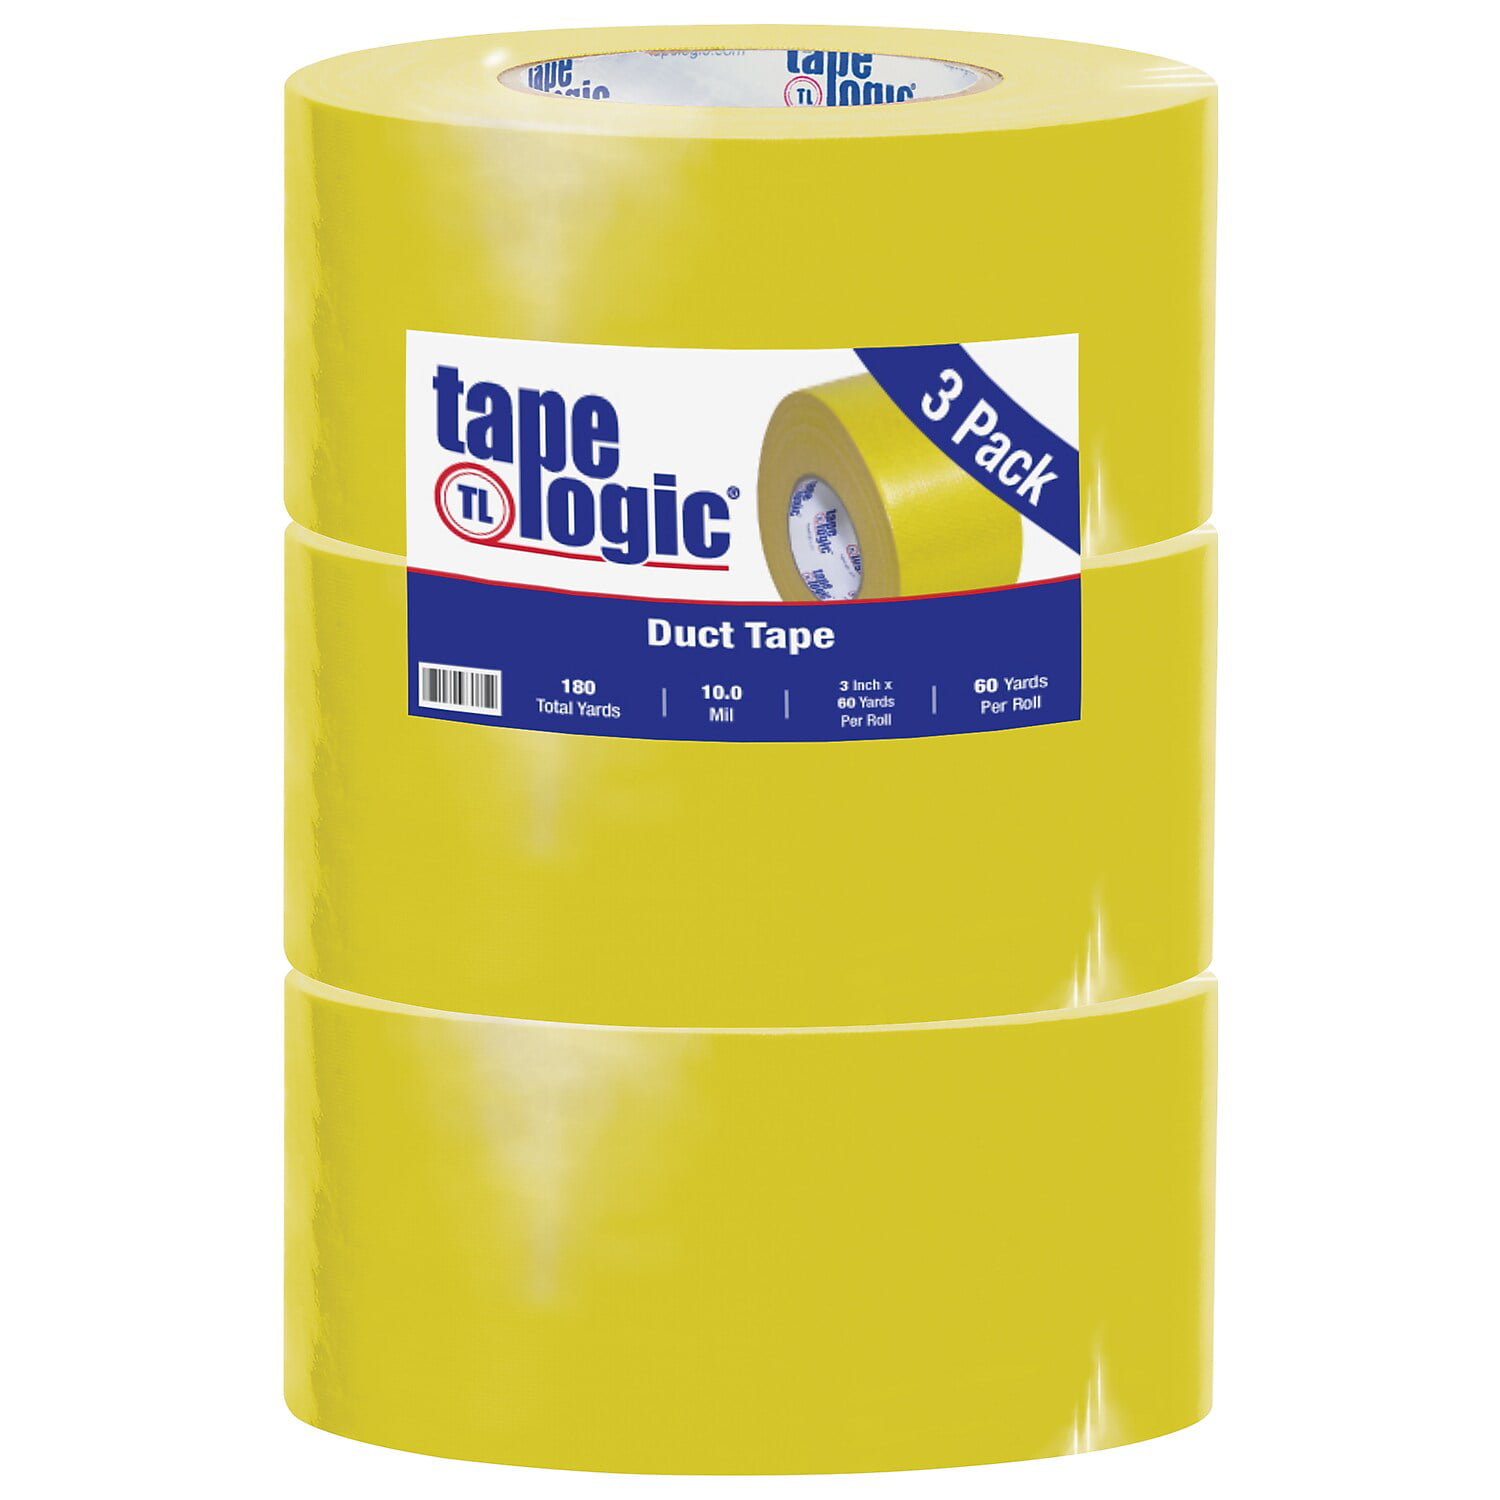 Box Partner Tape Logic T988100Y3PK 3 in. x 60 Yards Yellow Tape Logic 10 mil Duct Tape, Pack of 3 - 3 Per Case